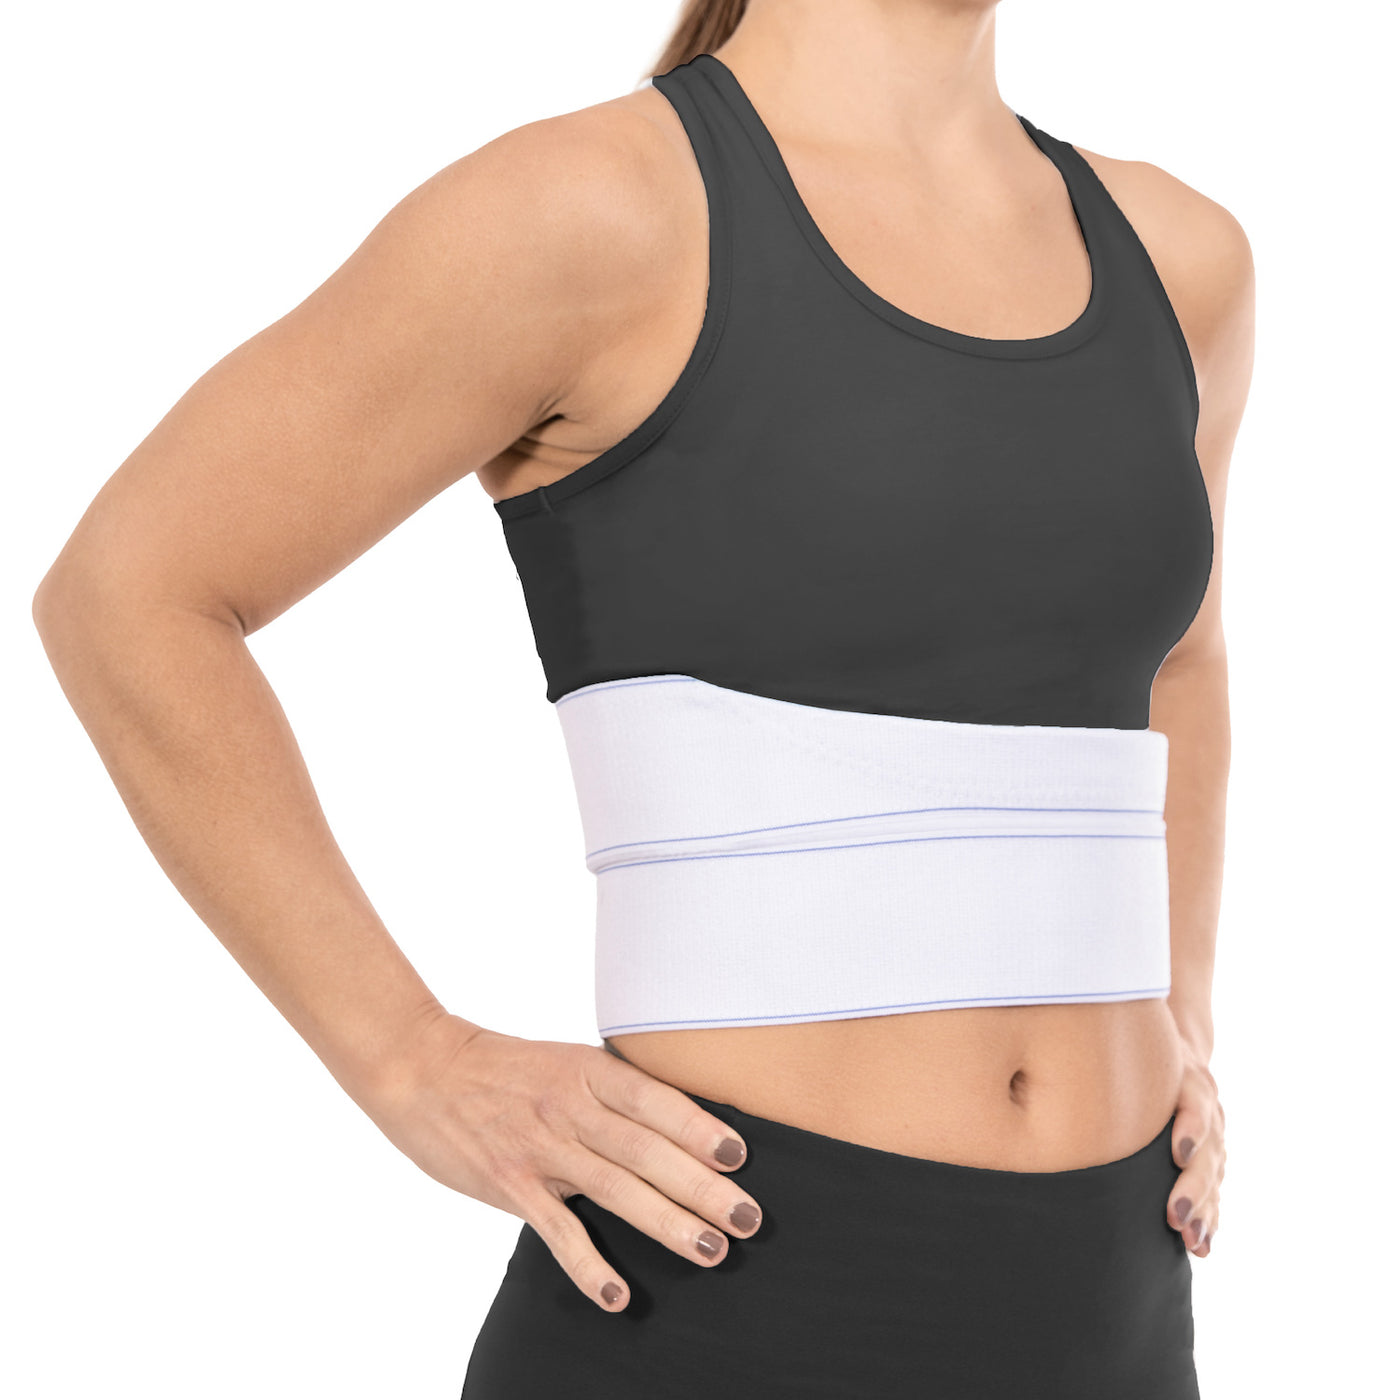 The BraceAbility broken rib brace is a white, wrap-around, compression belt to help immobilize fractured, cracked, or dislocated ribs and provide pain support